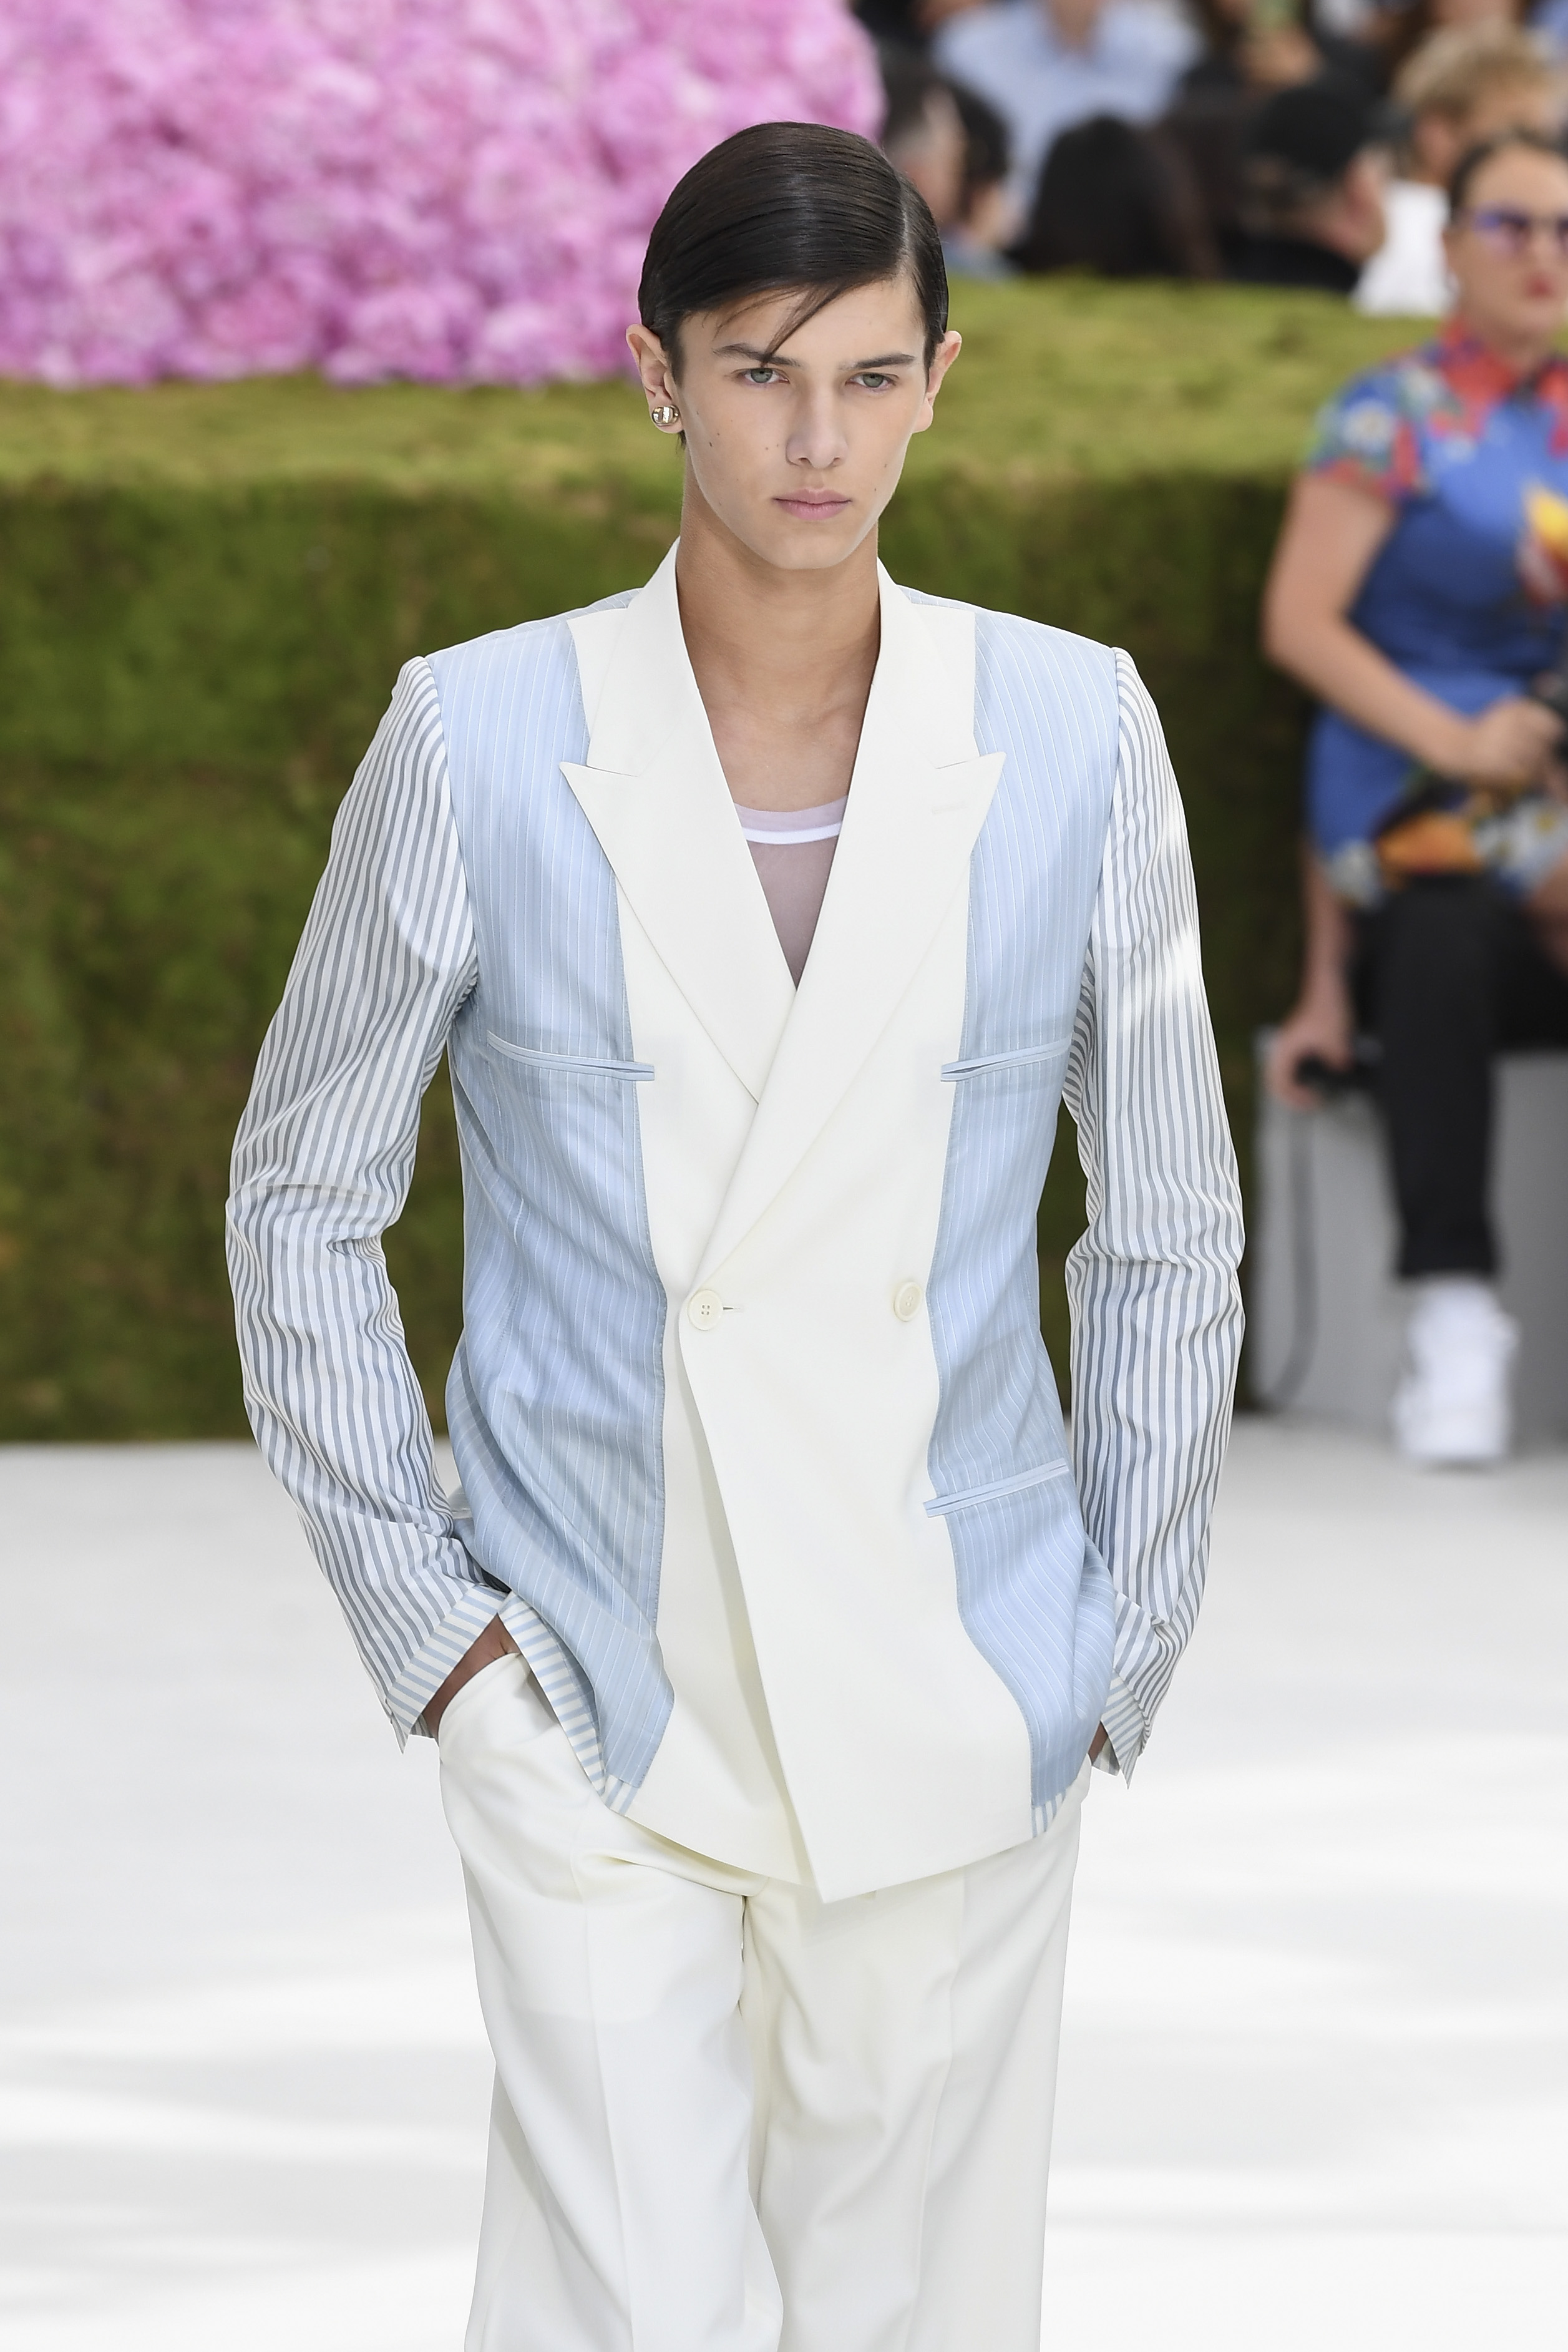 PARIS, FRANCE - JUNE 23: Prince Nikolai of Denmark walks the runway during the Dior Homme Menswear Spring/Summer 2019 show as part of Paris Fashion Week on June 23, 2018 in Paris, France. (Photo by Pascal Le Segretain/Getty Images)